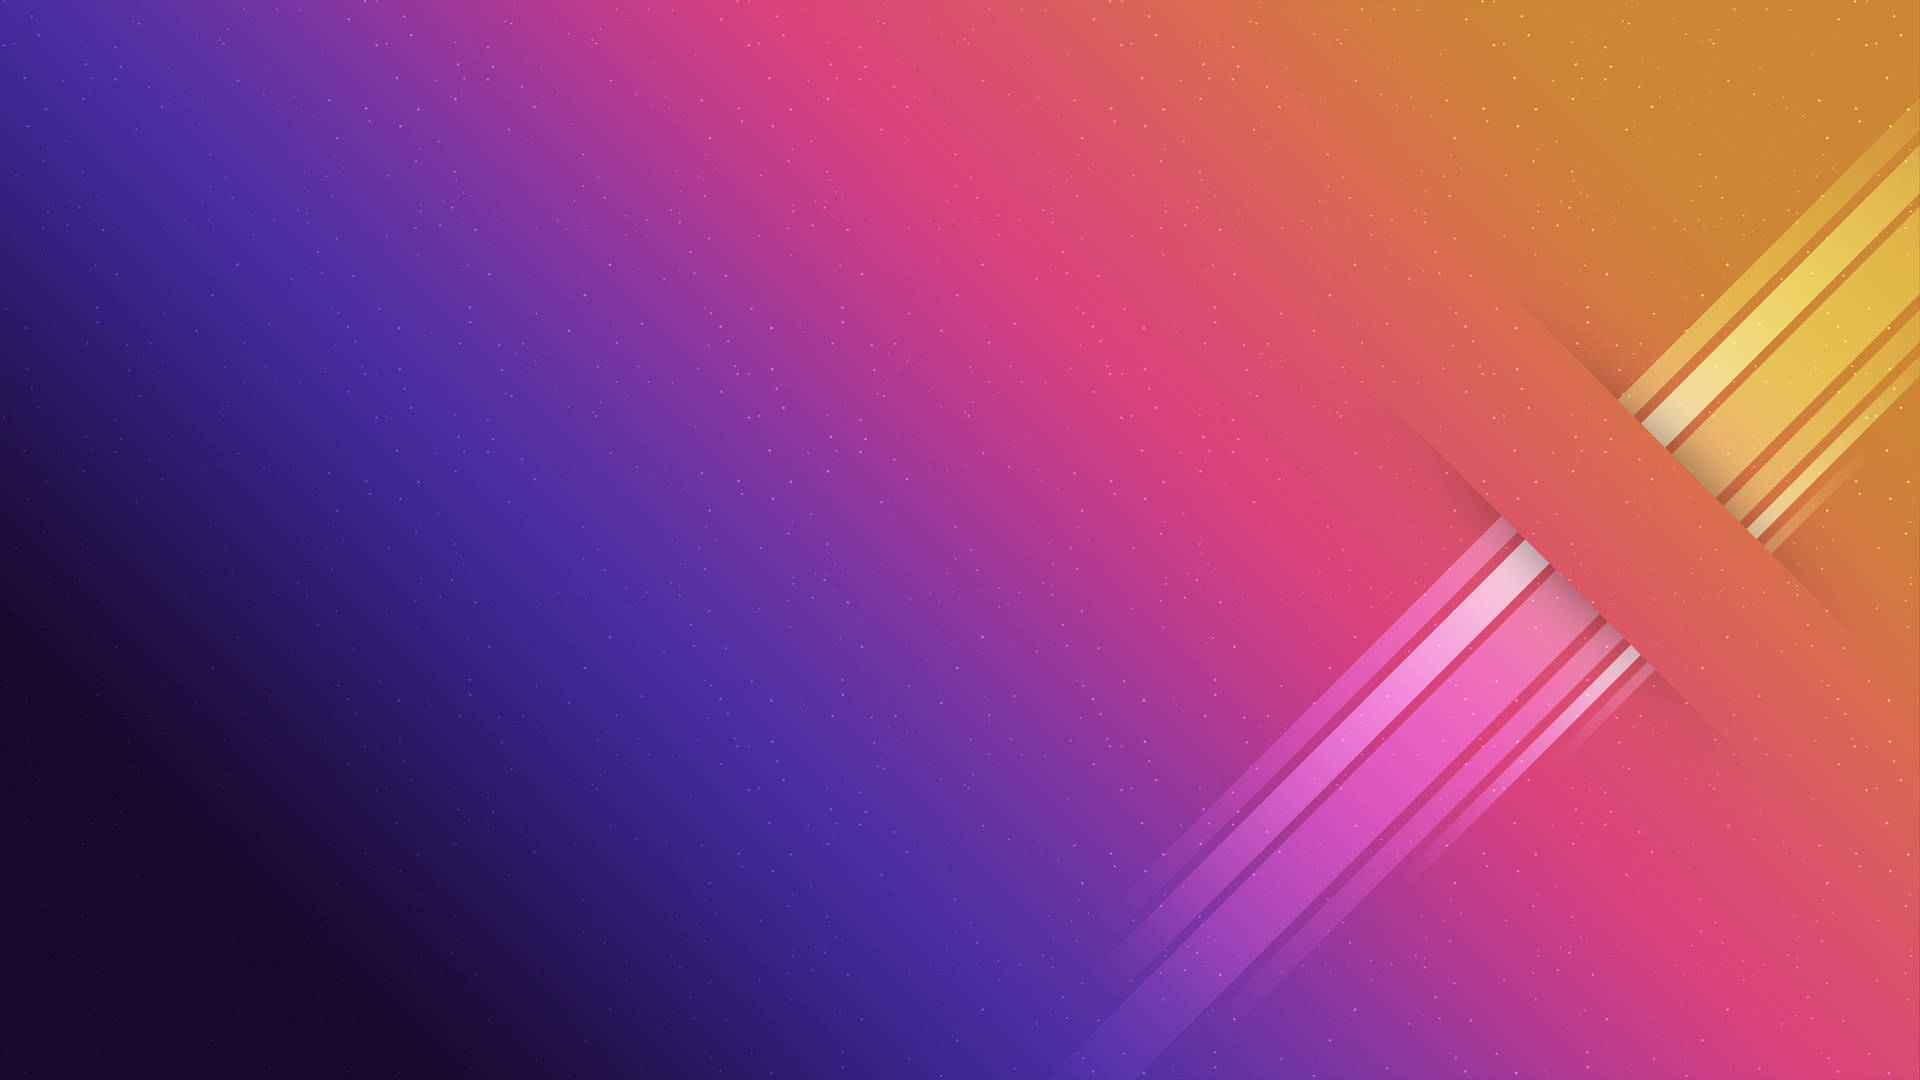 Simple Hd Purple And Pink